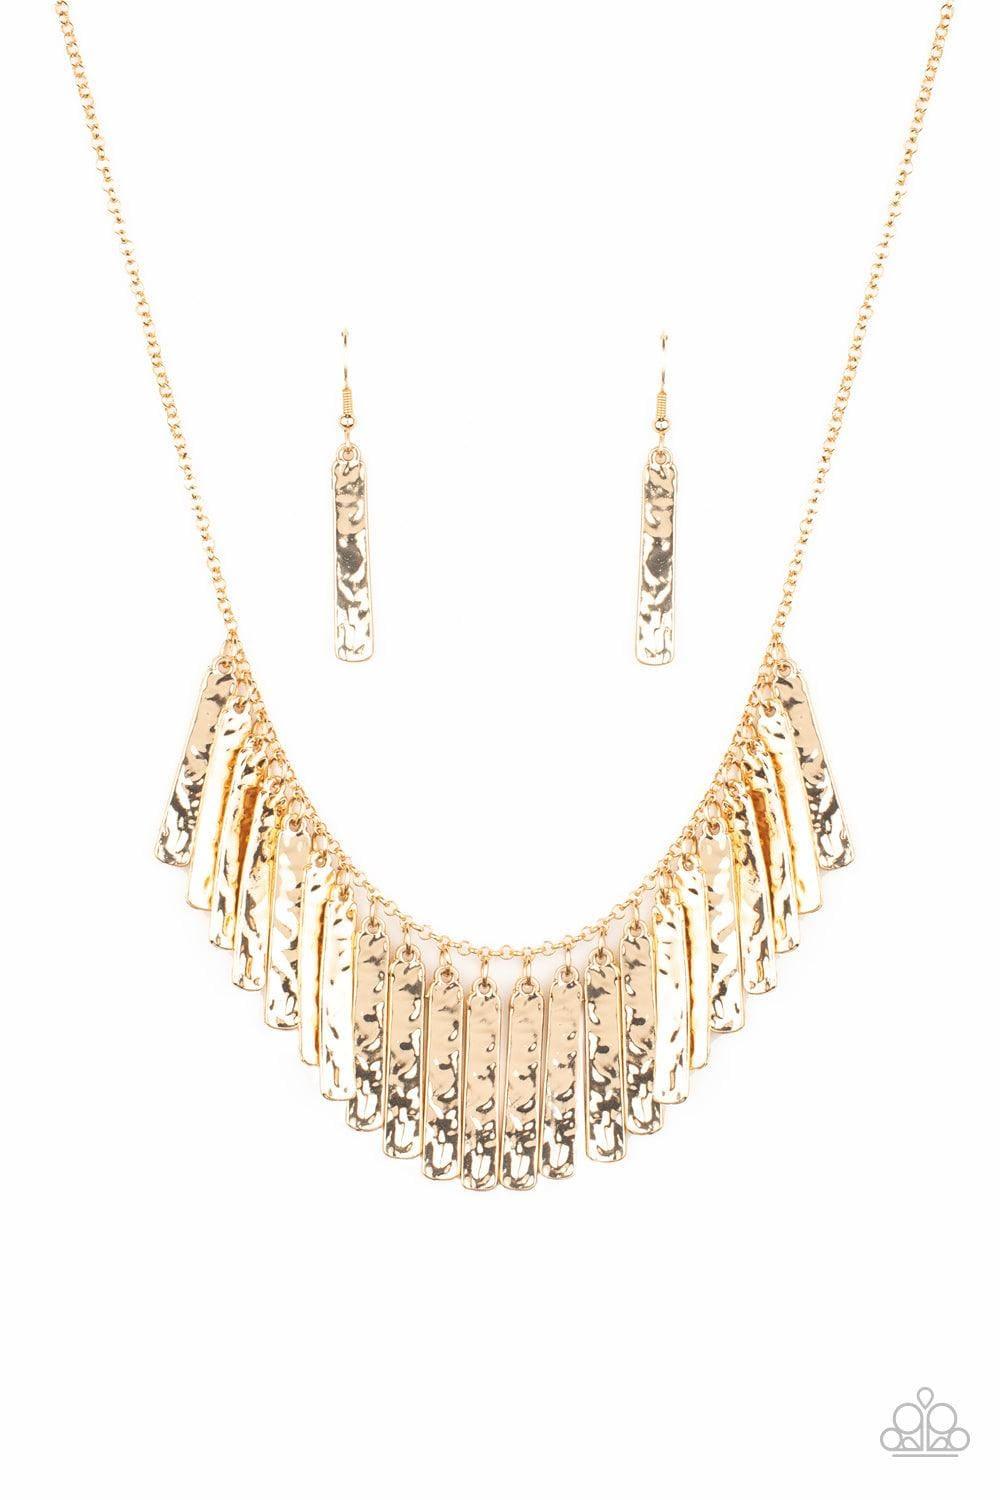 Paparazzi Accessories - Metallic Muse - Gold Necklace - Bling by JessieK